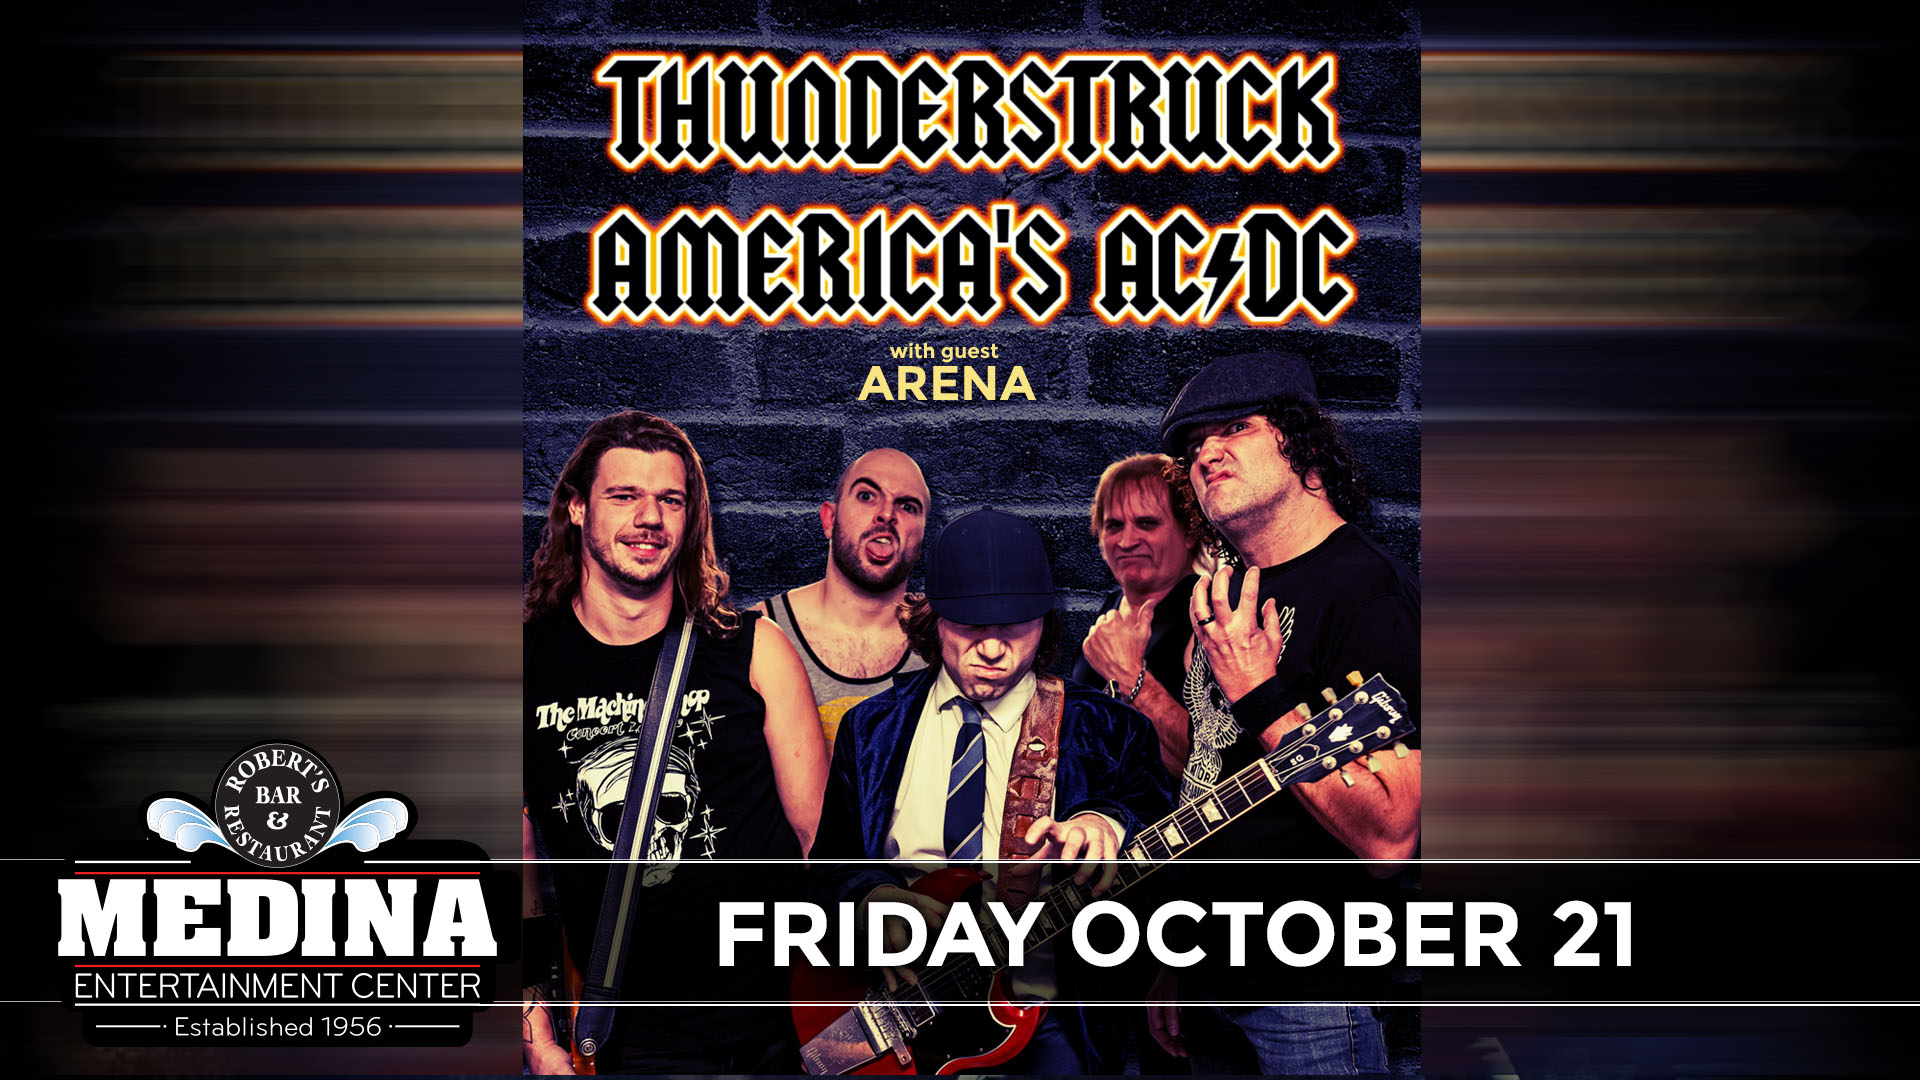 THUNDERSTRUCK Americas AC/DC Tribute with guest ARENA Medina Entertainment Center Friday, October 21st, 2022 Doors: 7:30PM | Music: 8:00PM | 21+